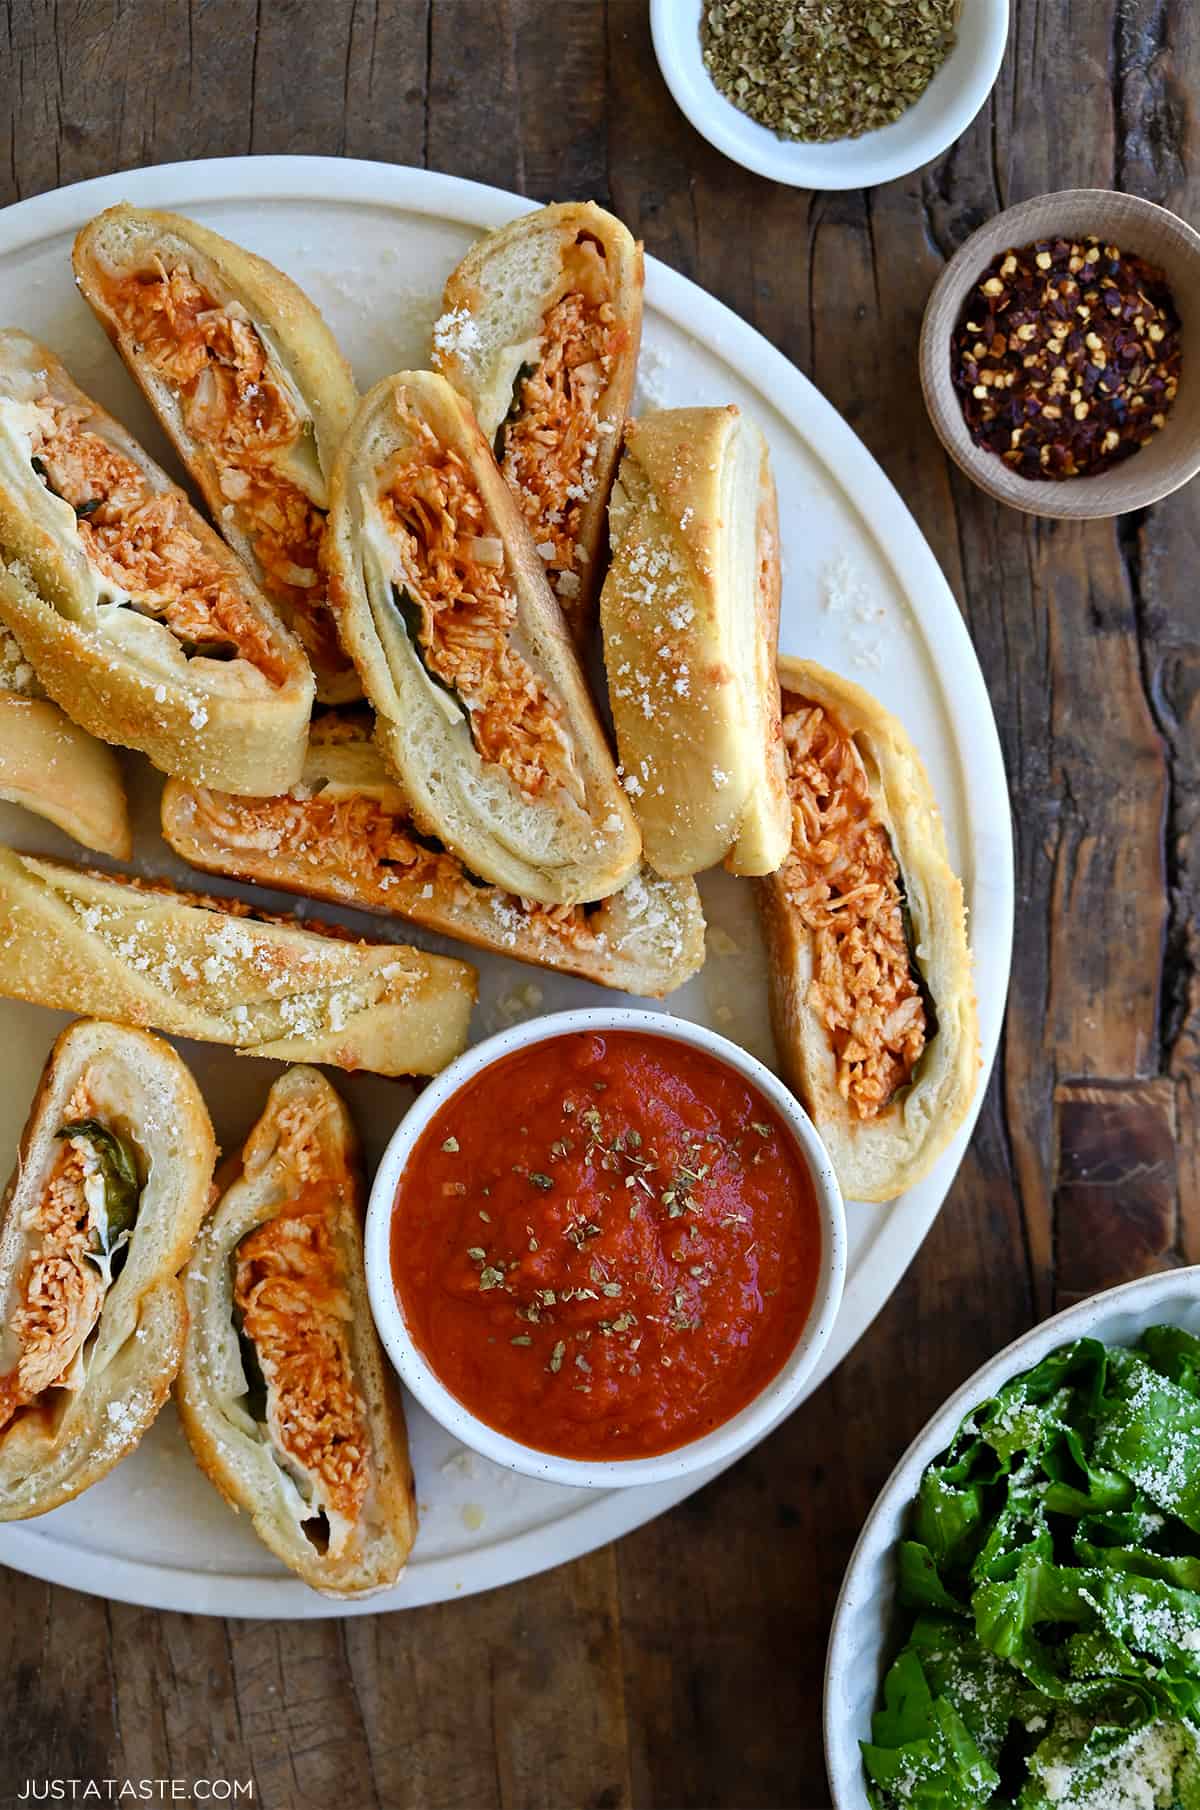 Slices of Stromboli on a round serving platter along with a small bowl containing marinara sauce.